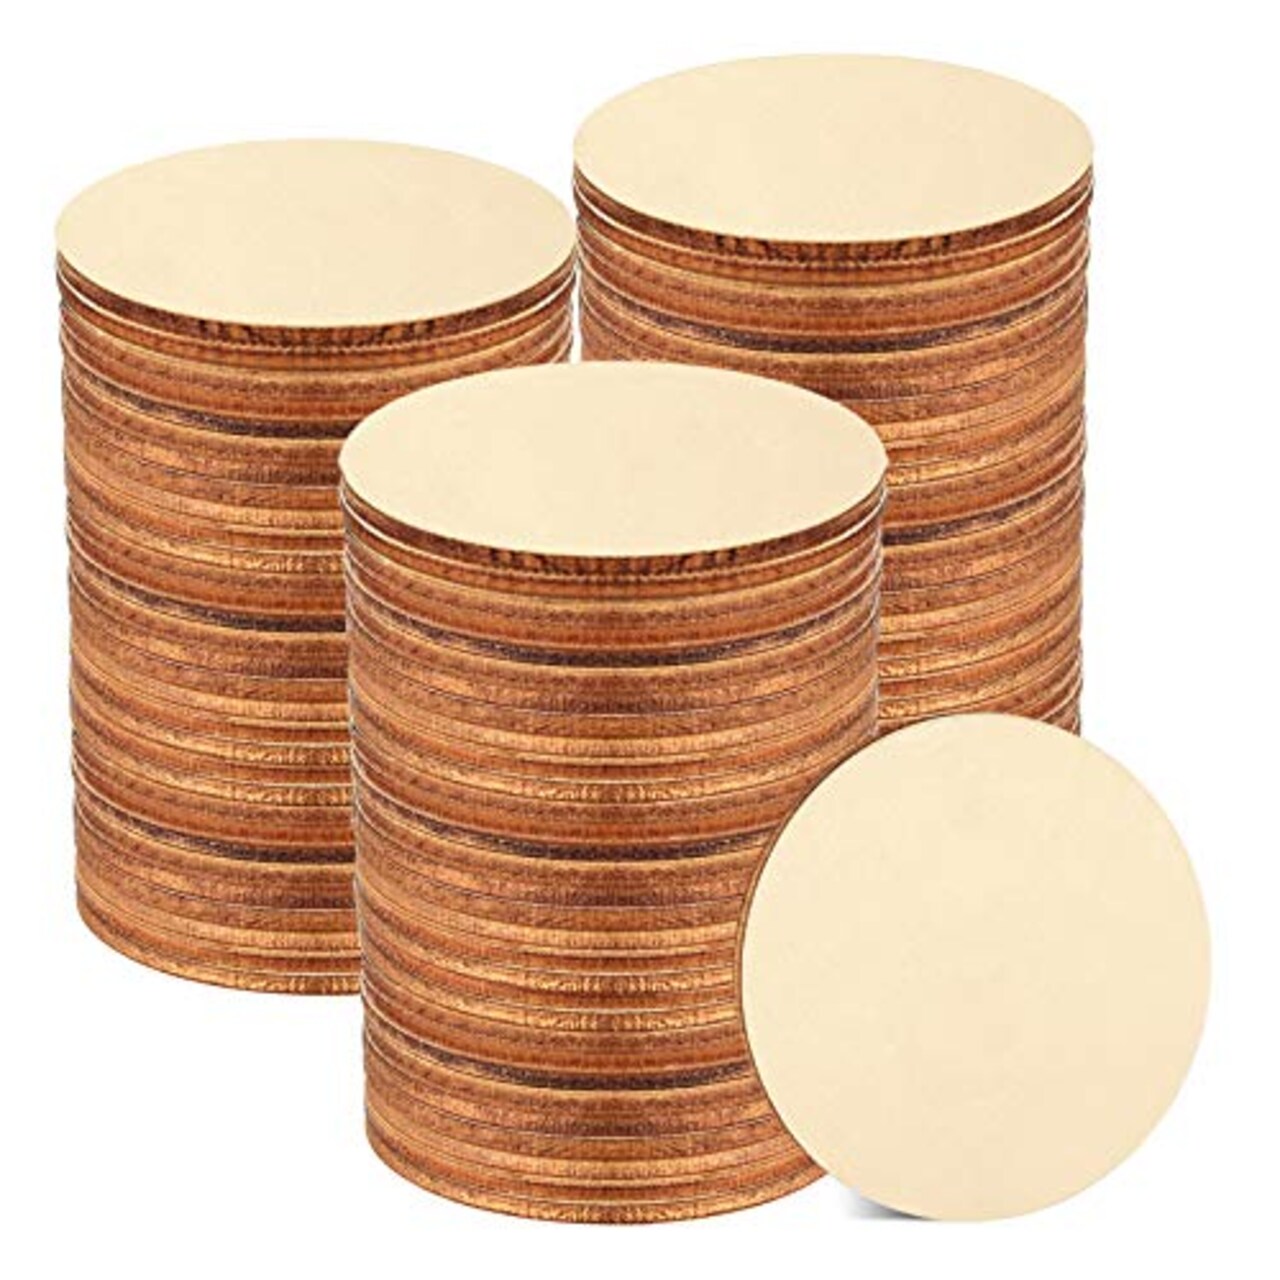 100 Pieces 3 Inch Unfinished Wooden Circles Blank Natural Round Wood Slices  Wooden Cutout Tiles for DIY Crafts Home Decoration Painting Staining